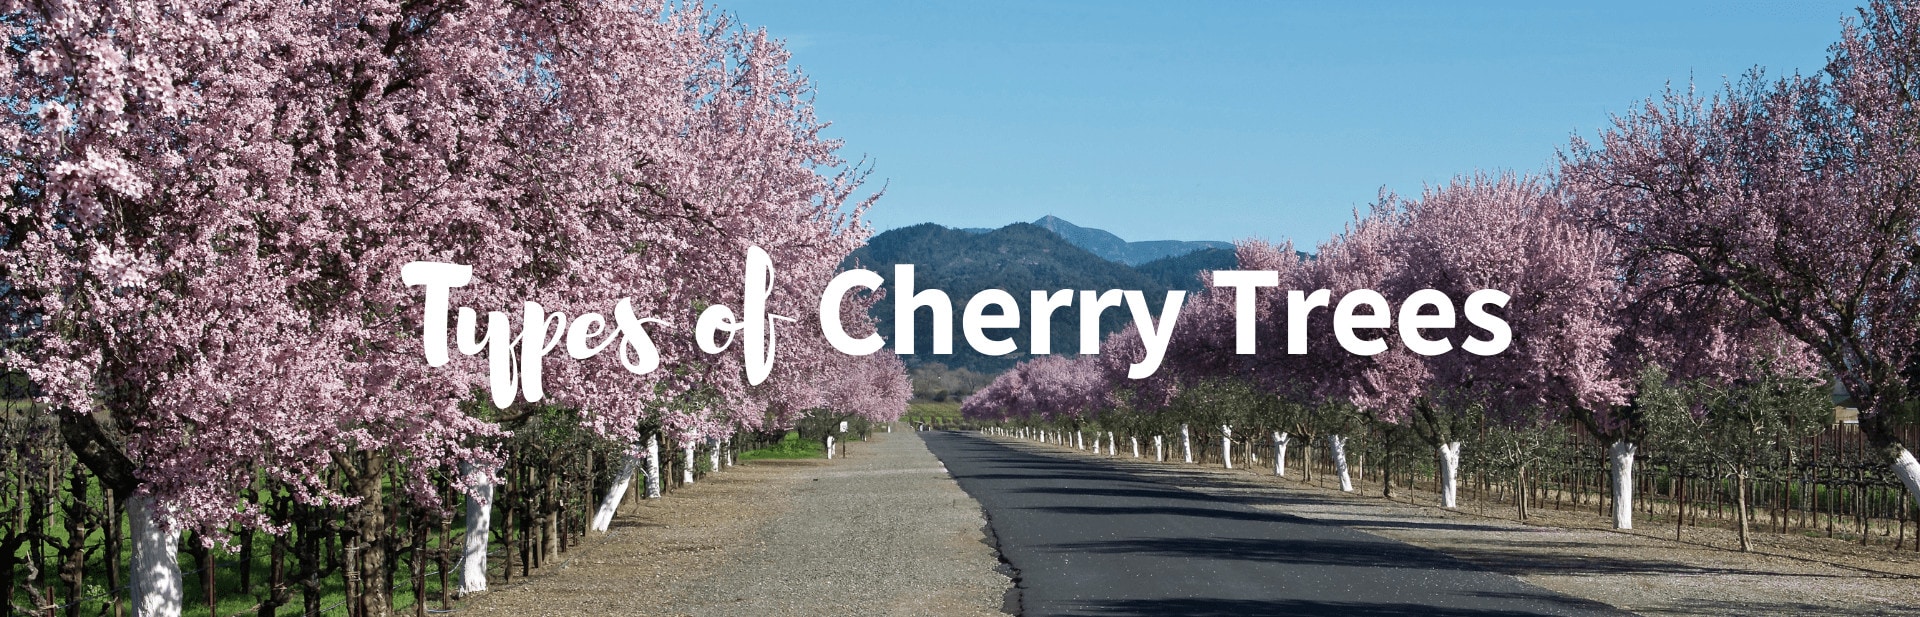 15+ Different Types of Cherry Trees (Chart, Pictures and Facts)